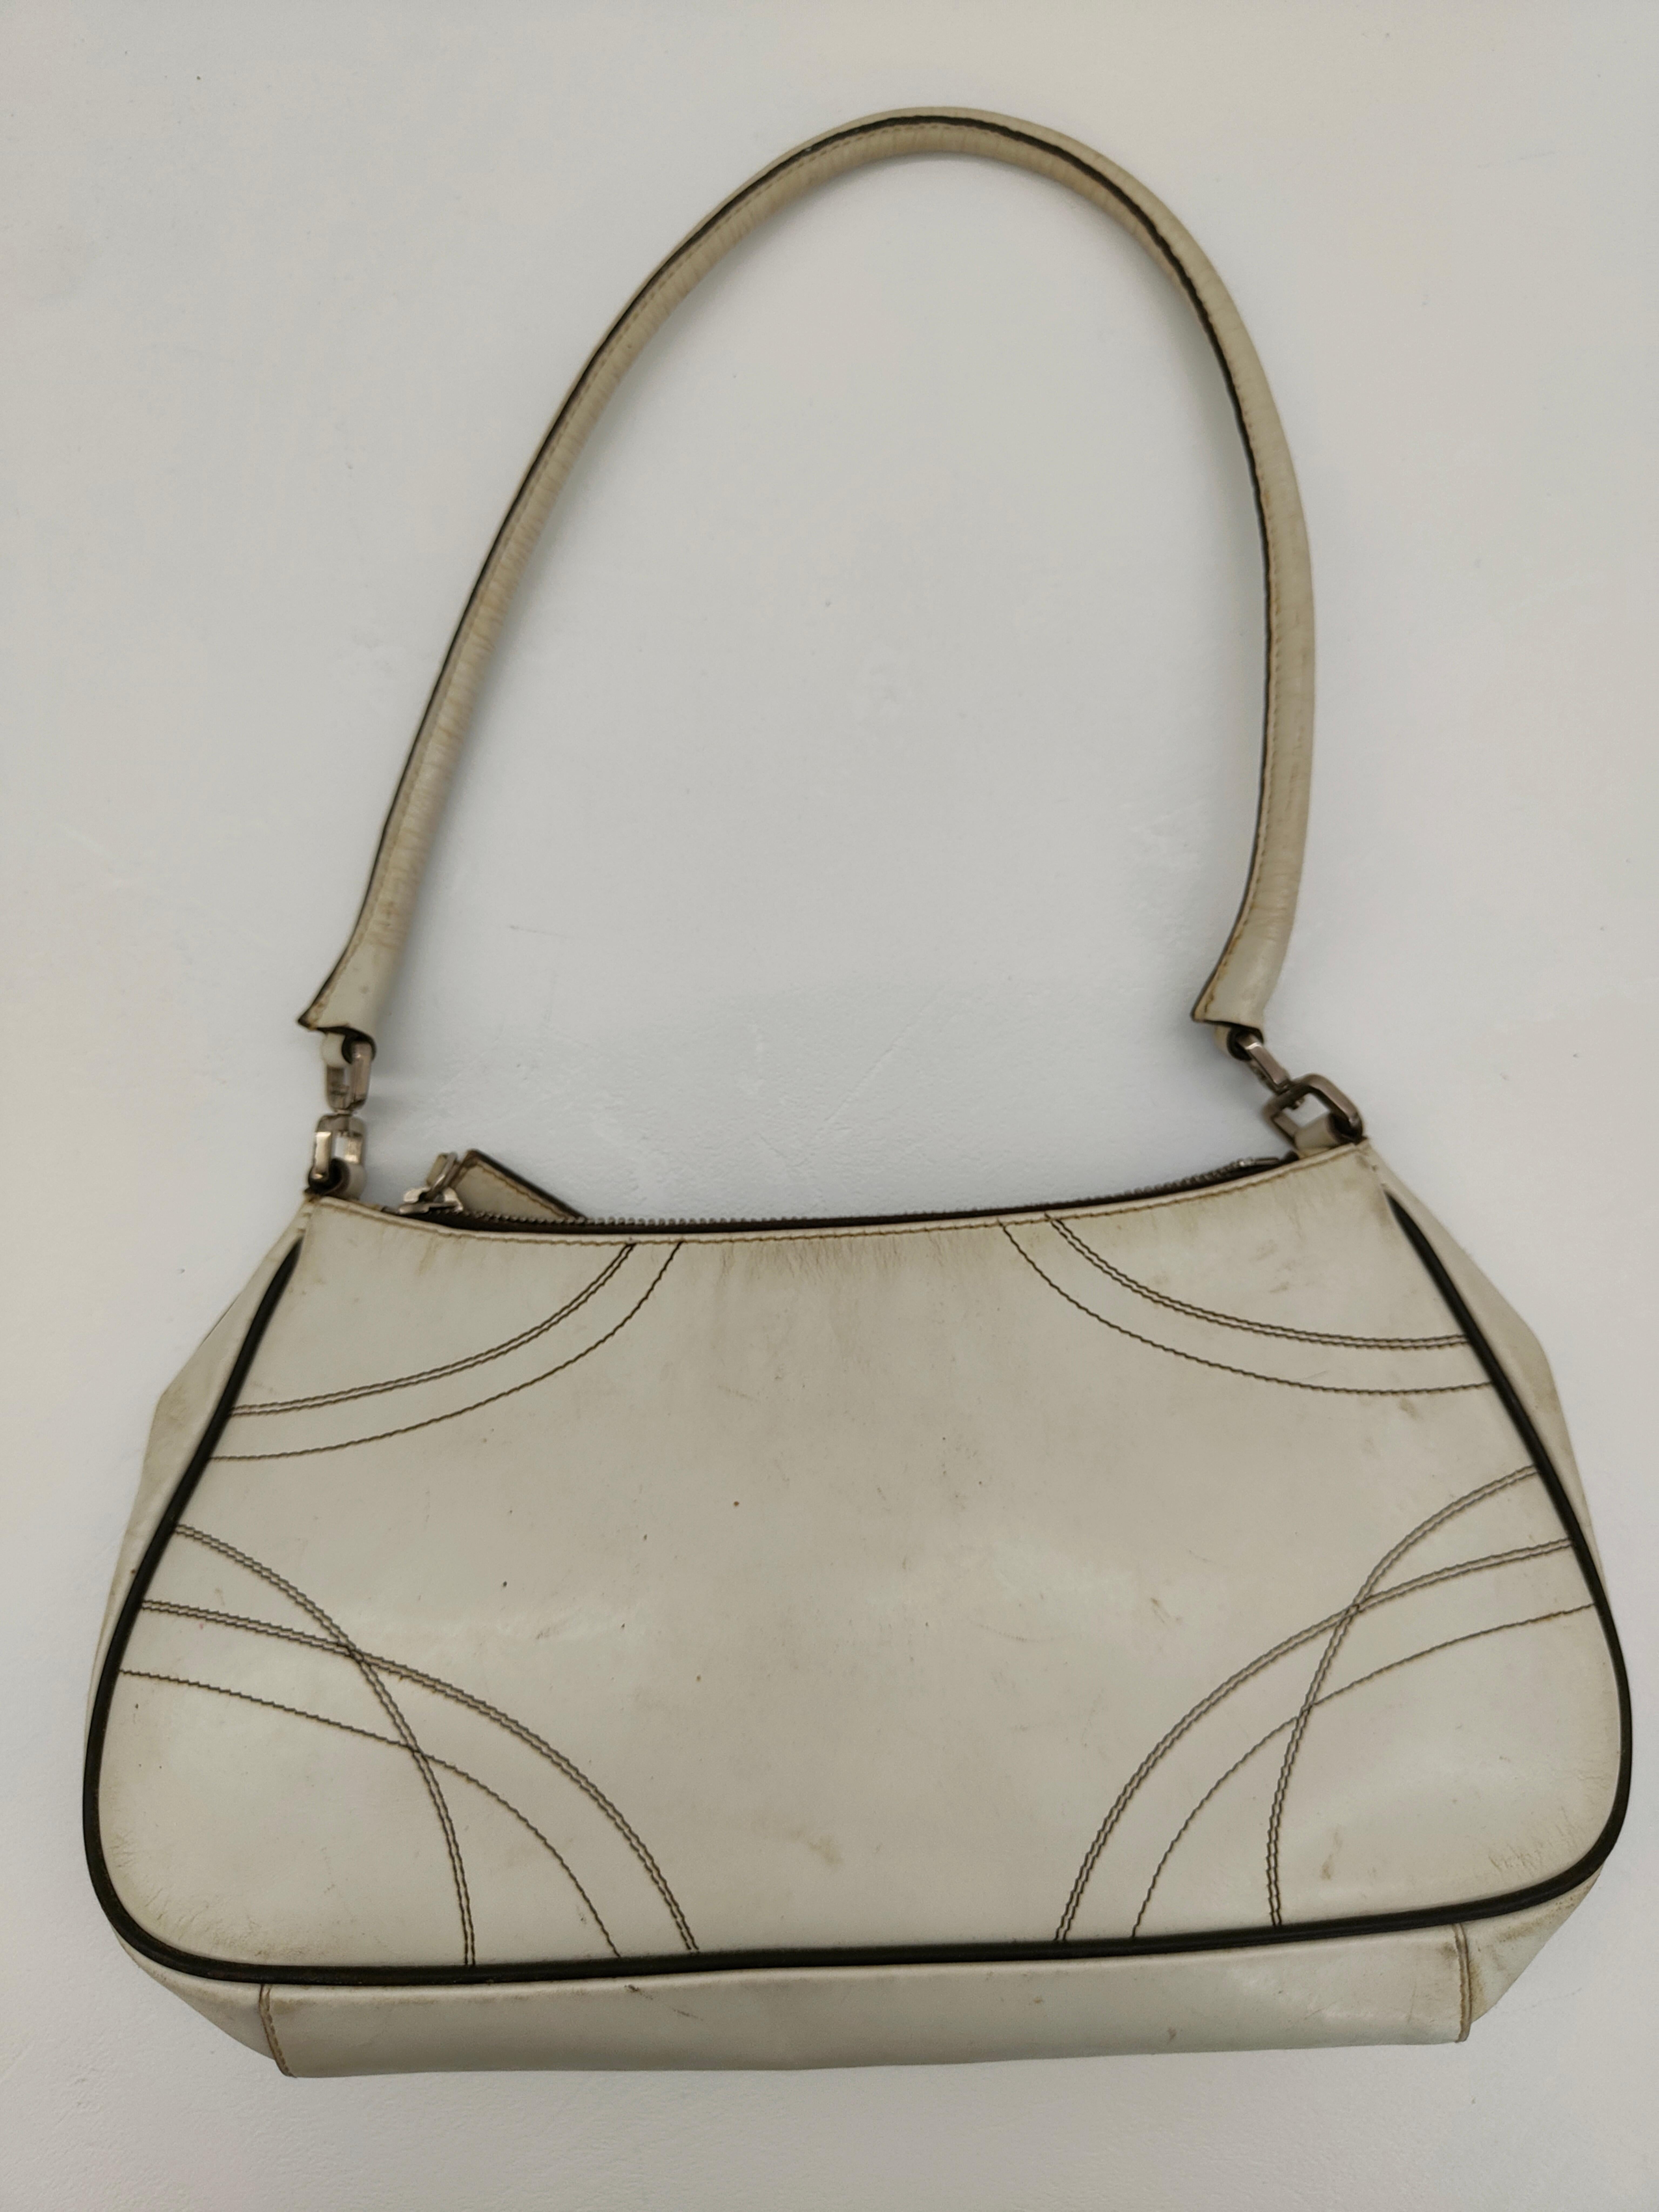 Prada leather shoulder bag
totally made in italy
measurements: 31*14 cm